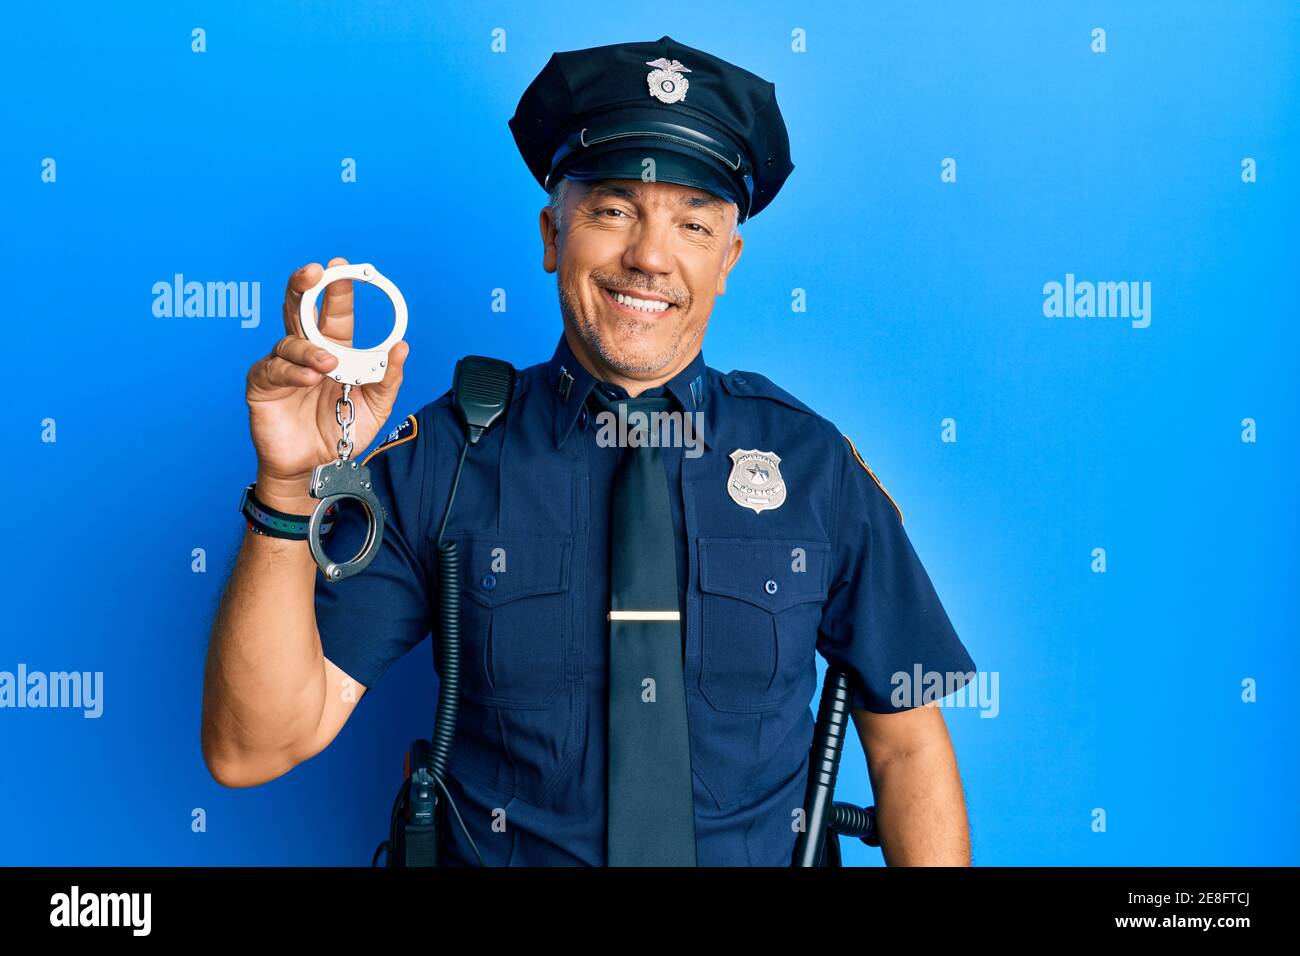 Handsome middle age mature man wearing police uniform holding metal handcuffs looking positive and happy standing and smiling with a confident smile s Stock Photo